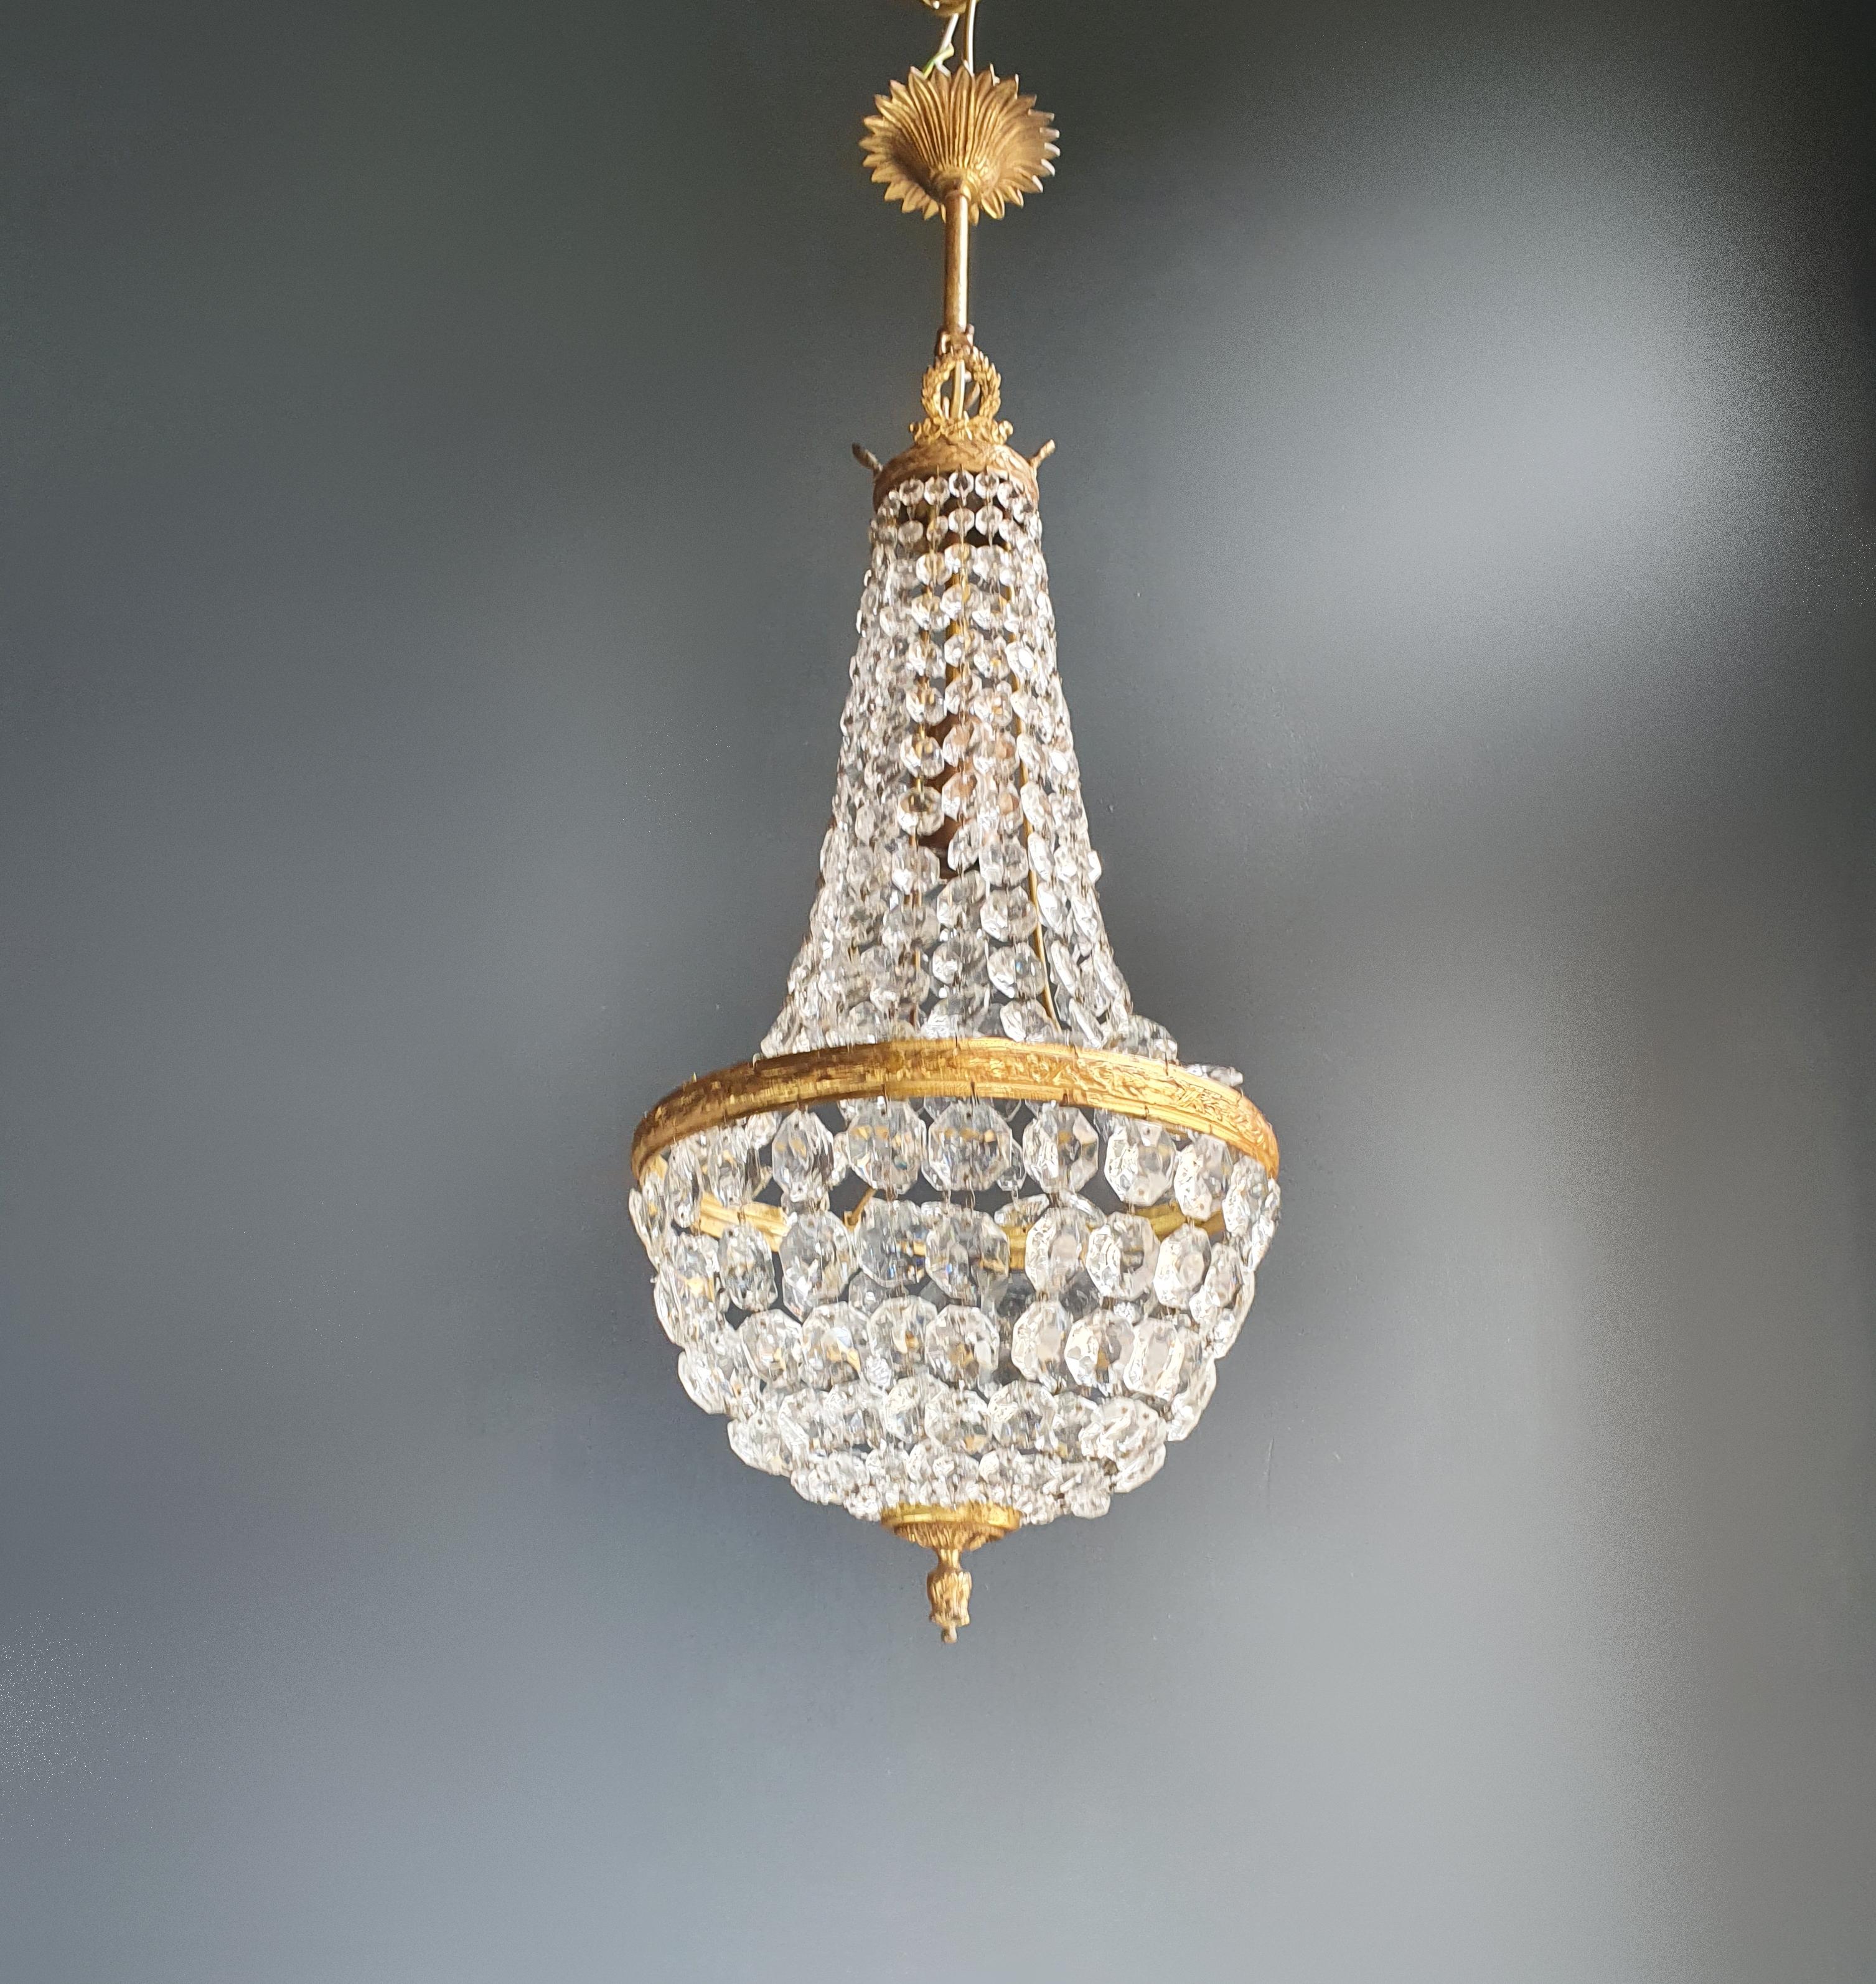 Cabling and sockets completely renewed. Crystal hand knotted
Measures: Total height 70 cm, without chain 55 cm, diameter 25 cm, weight (approximately) 4 kg.

Number of lights: One-light bulb sockets: E27

Fine brass Empire Sac a pearl